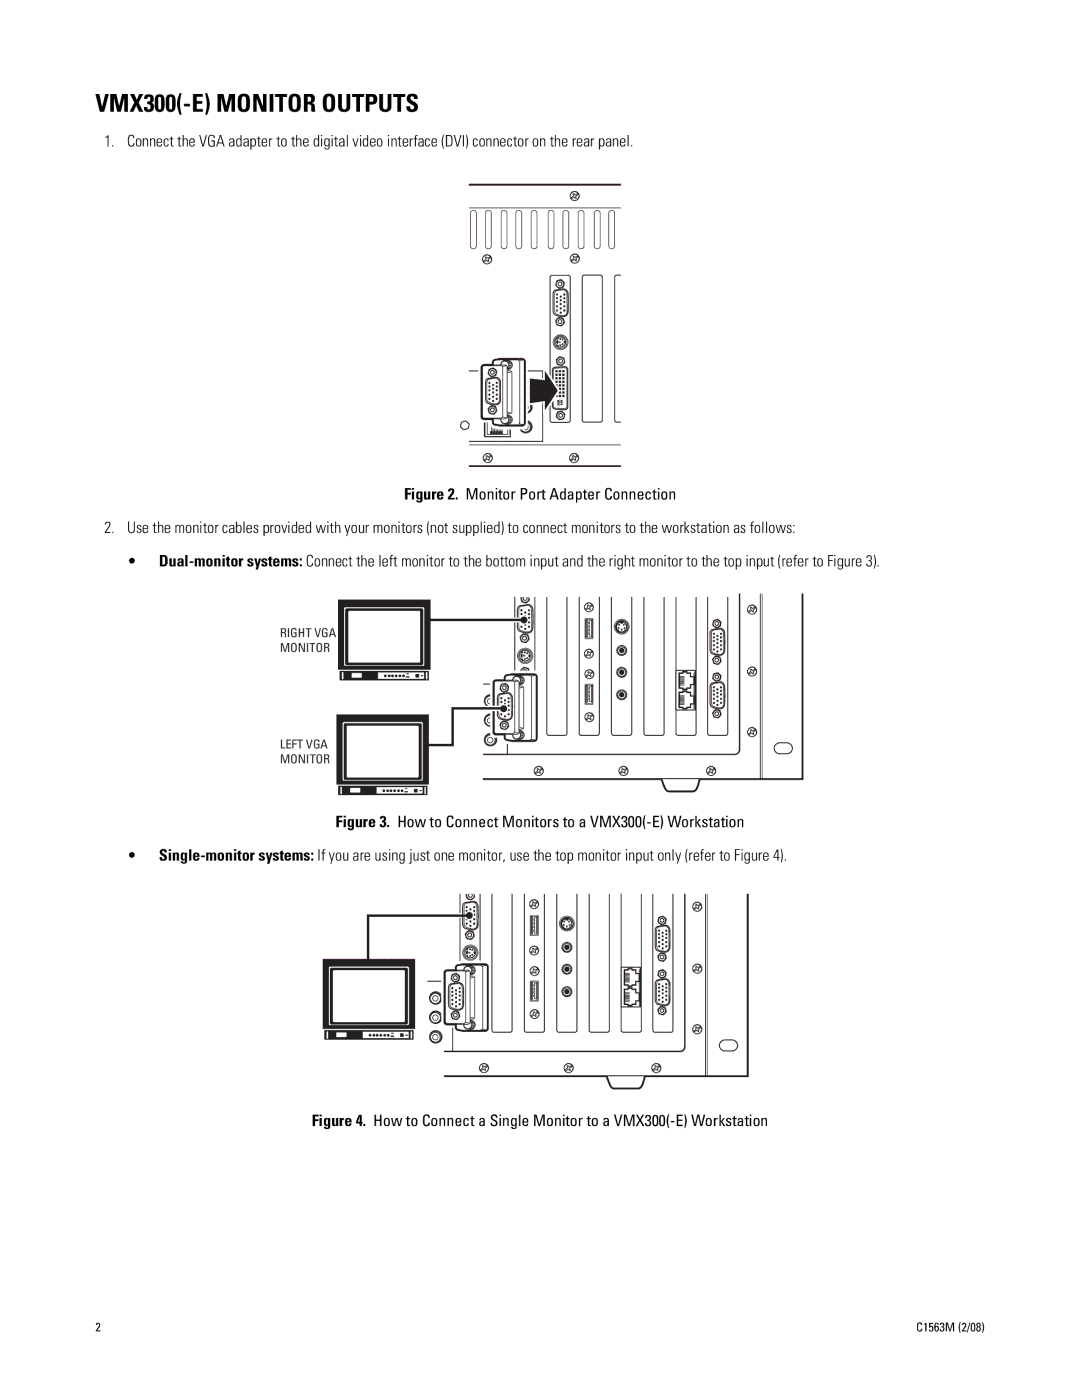 Pelco installation manual VMX300-E Monitor Outputs, How to Connect a Single Monitor to a VMX300-E Workstation 